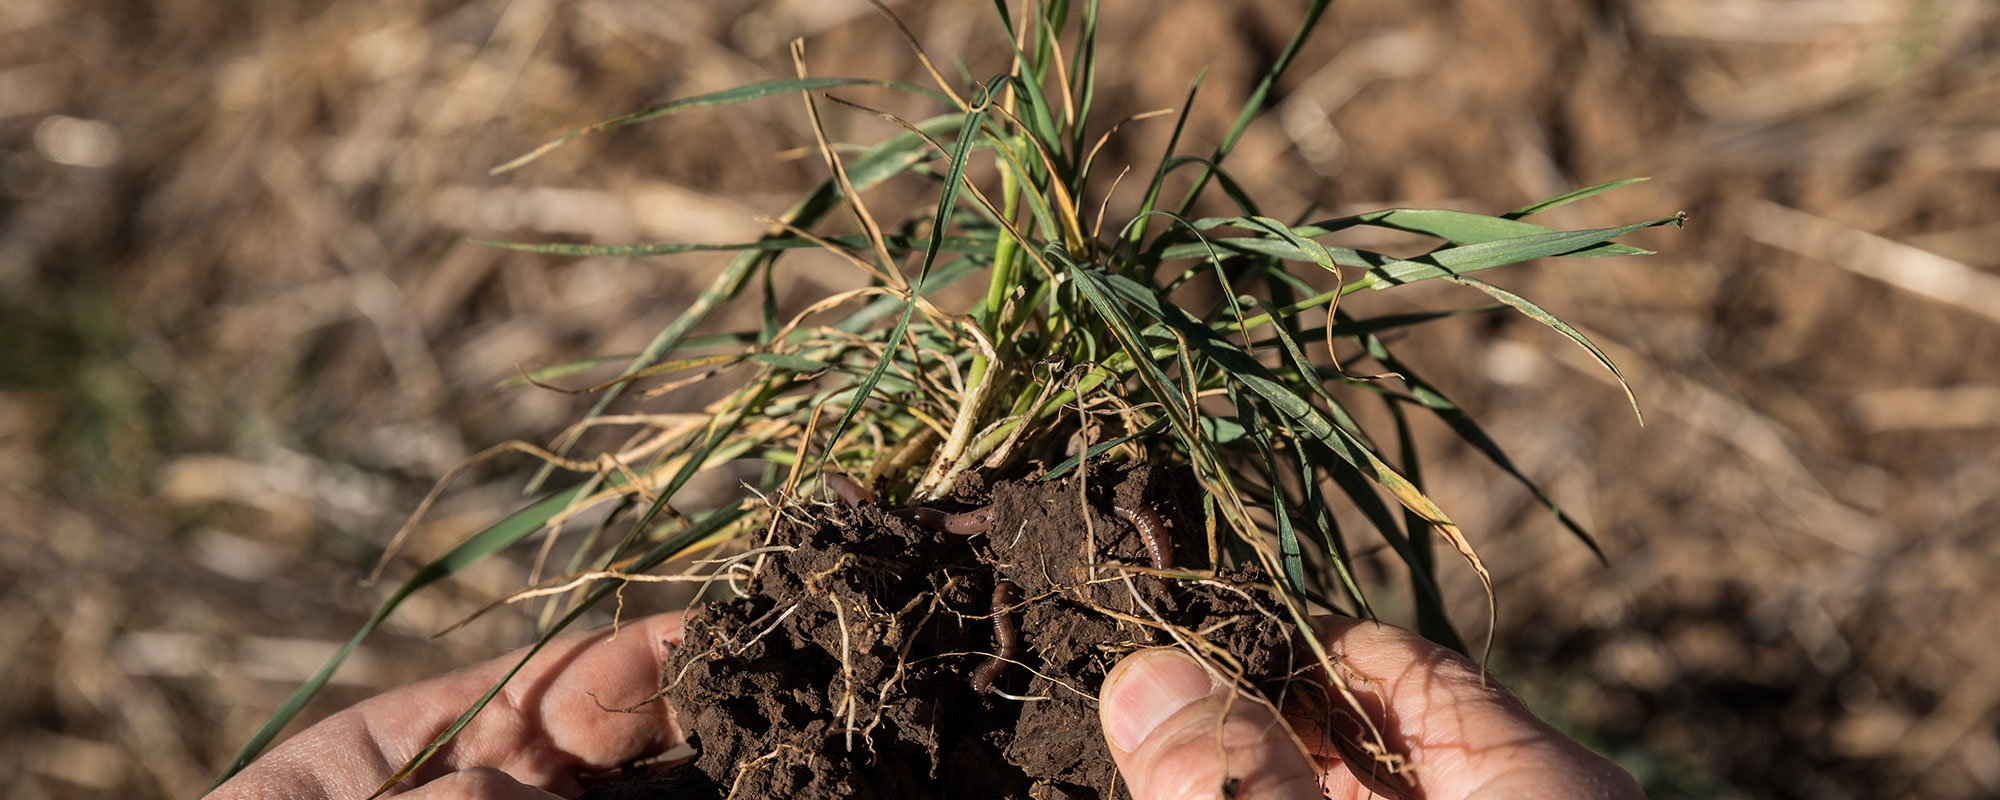 5 Reasons Why Soil Biology Matters on the Farm